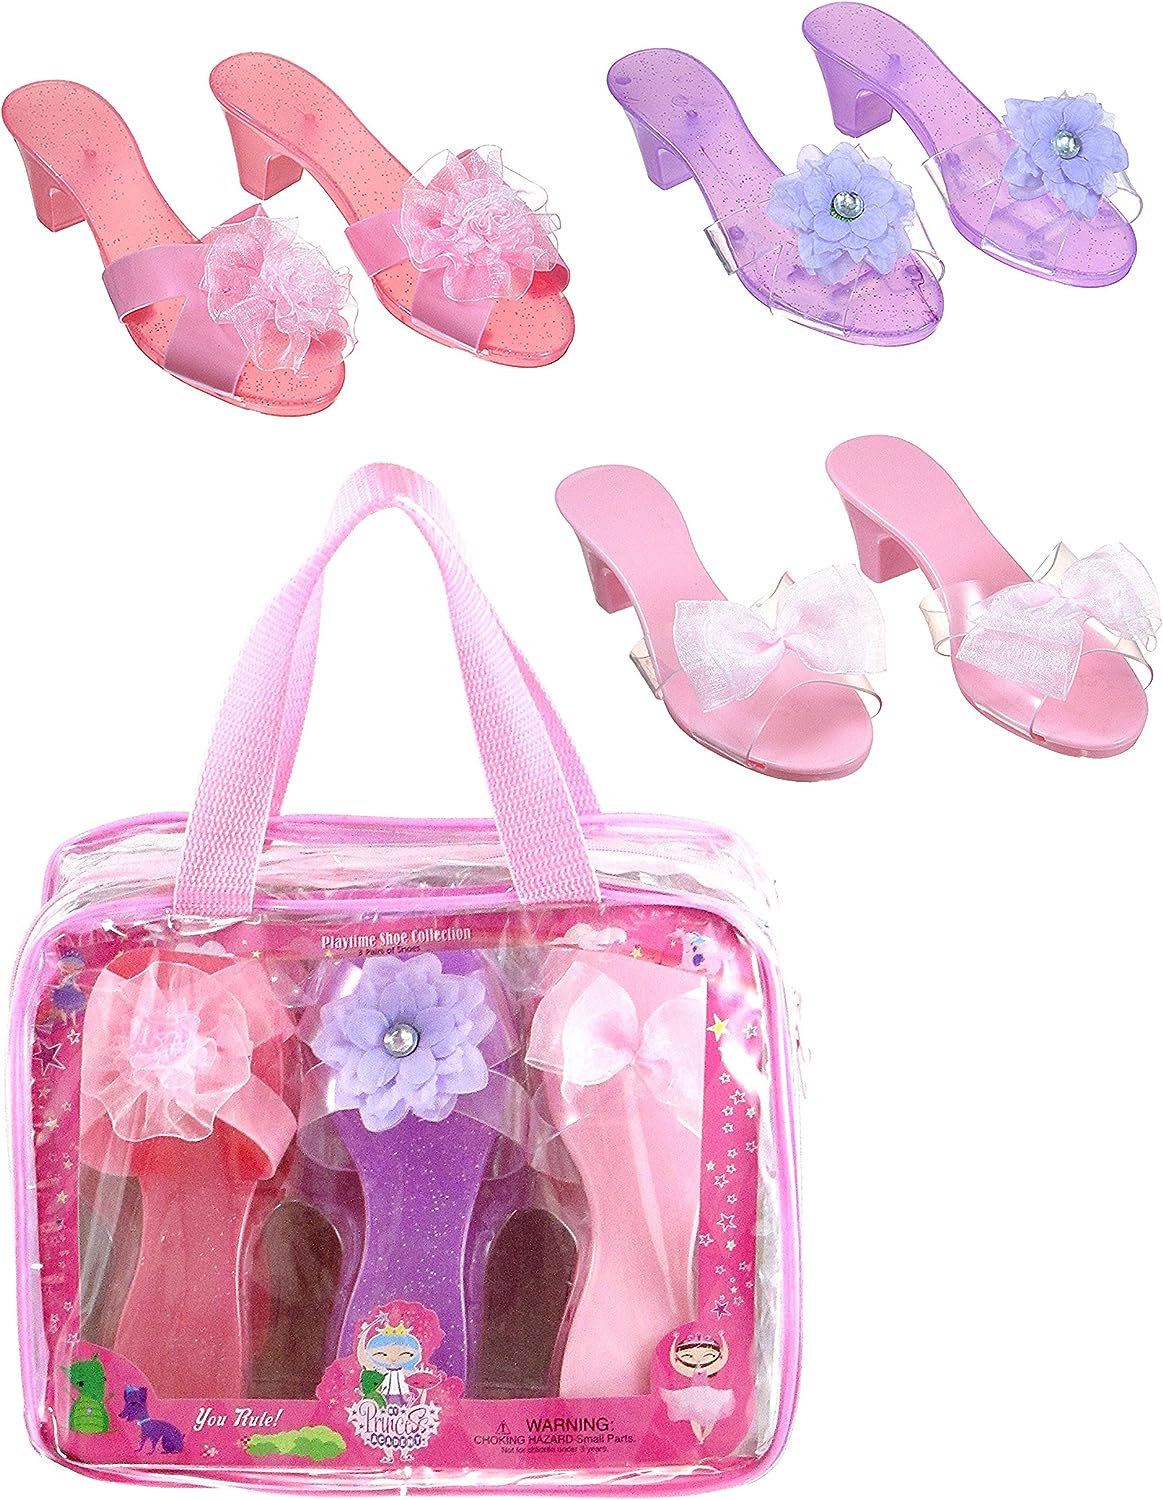 Expressions Princess Heels Set in Carrying Bag - [...]